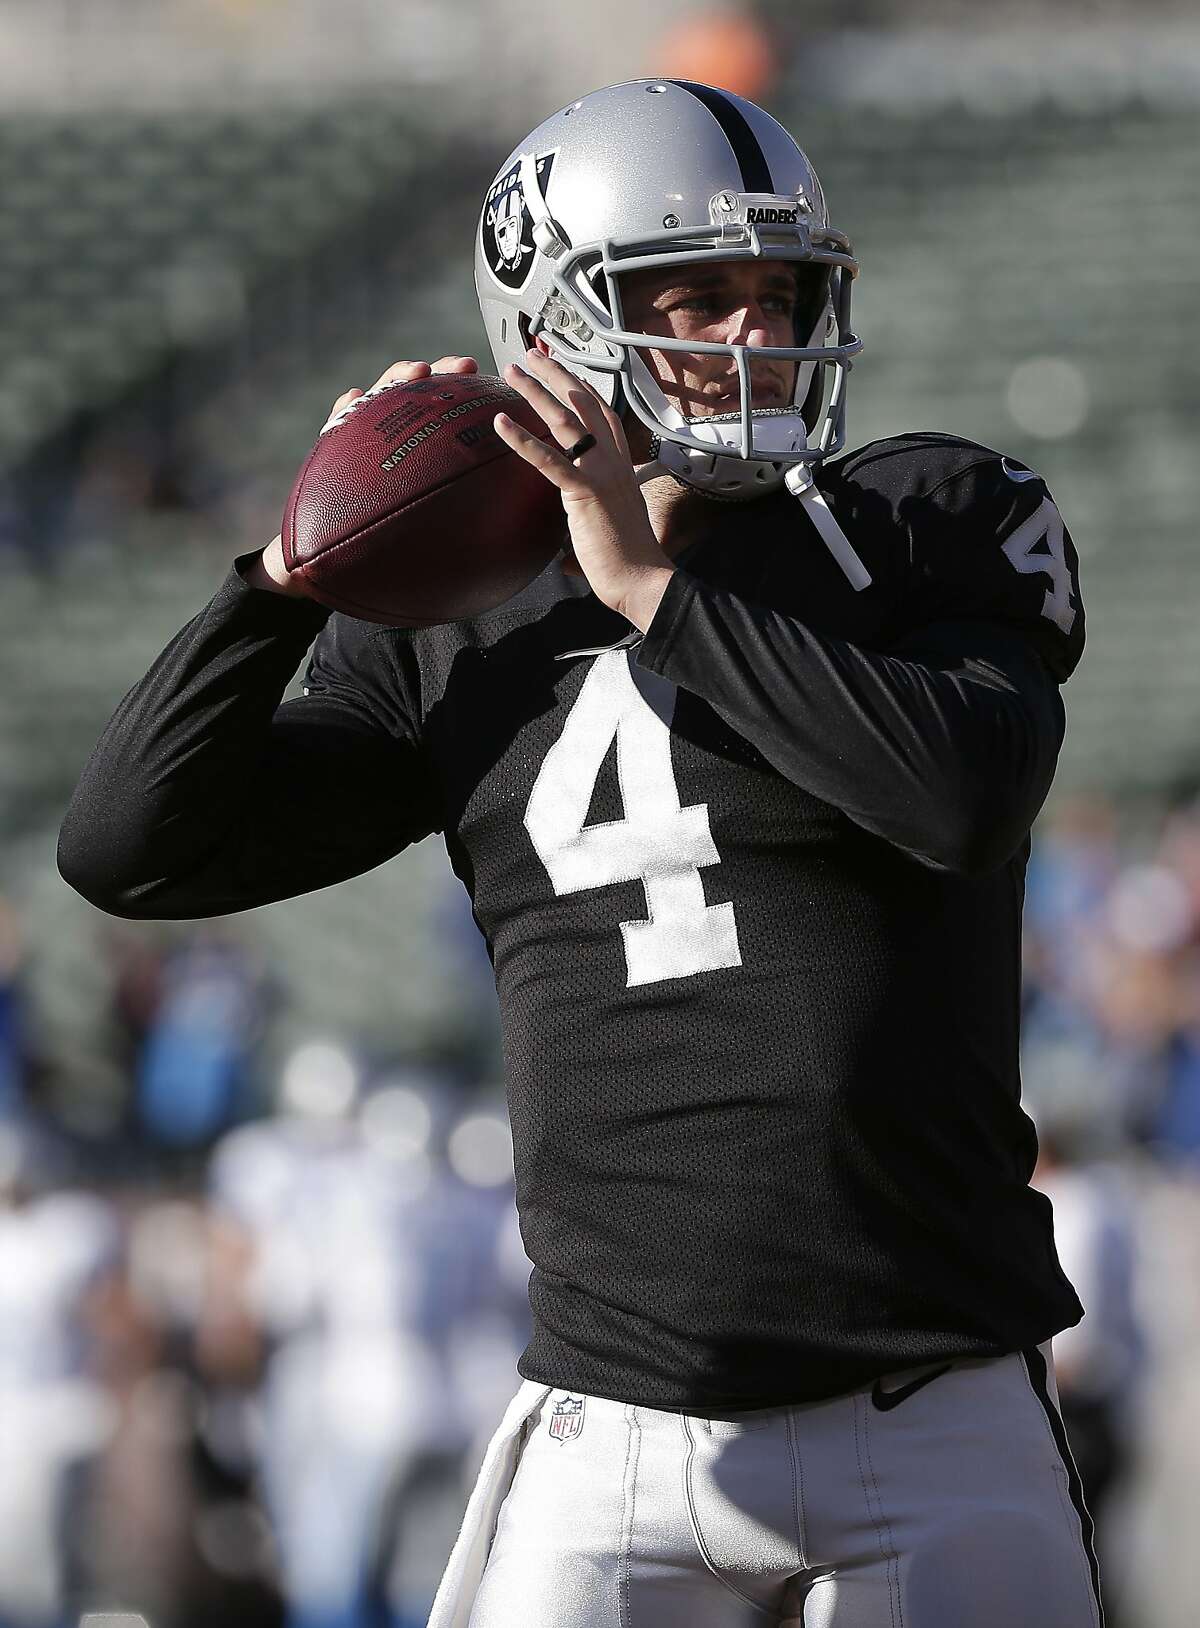 With Schaub out, QB Carr gets shot to impress Raiders